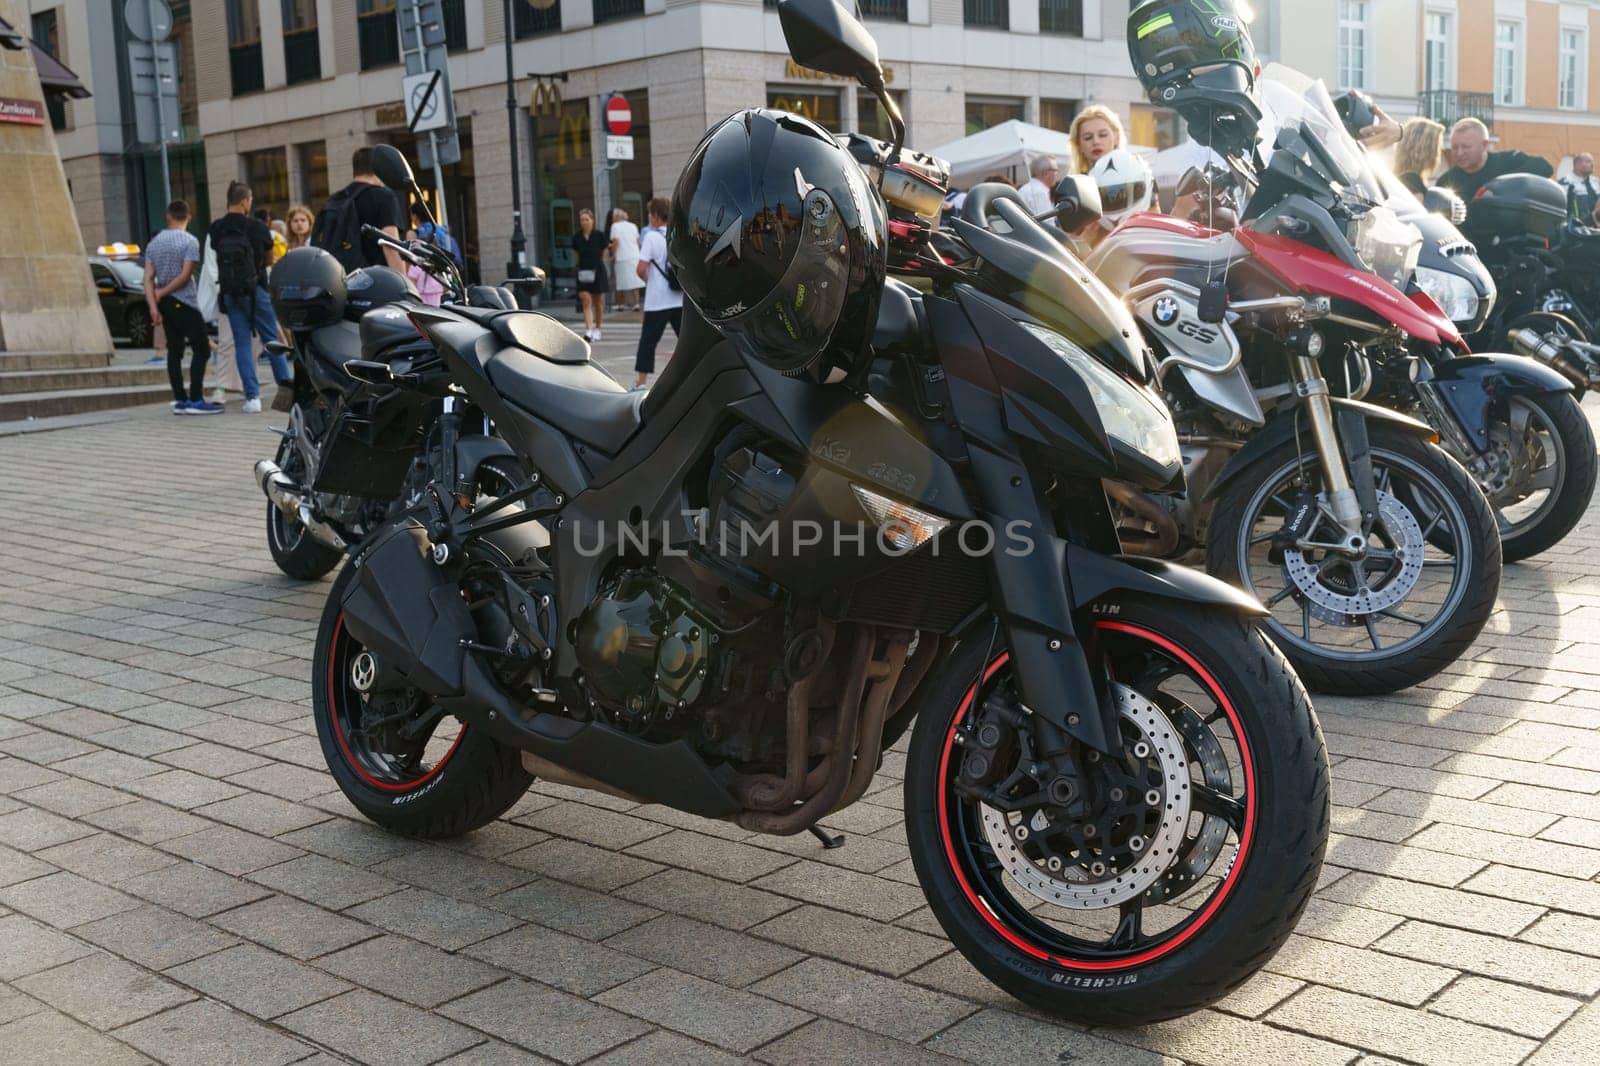 Warsaw, Poland - August 6, 2023: A black Kawasaki motorcycle is parked in the square next to other motorcycles.